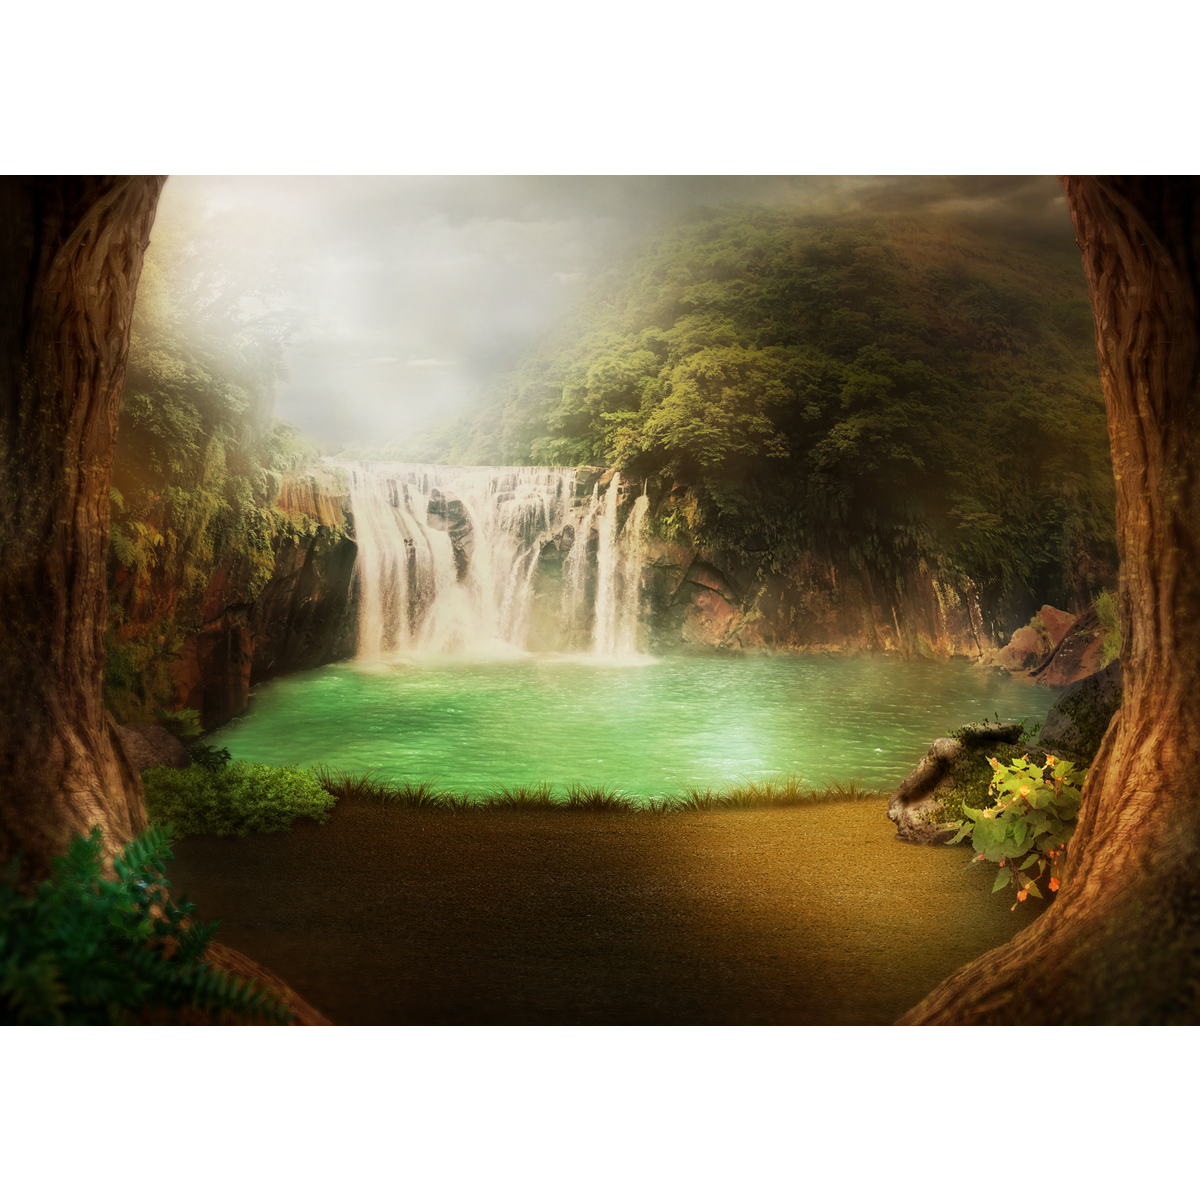 Find 5x7FT Vinyl Waterfall Pool Photography Backdrop Background Studio Prop for Sale on Gipsybee.com with cryptocurrencies